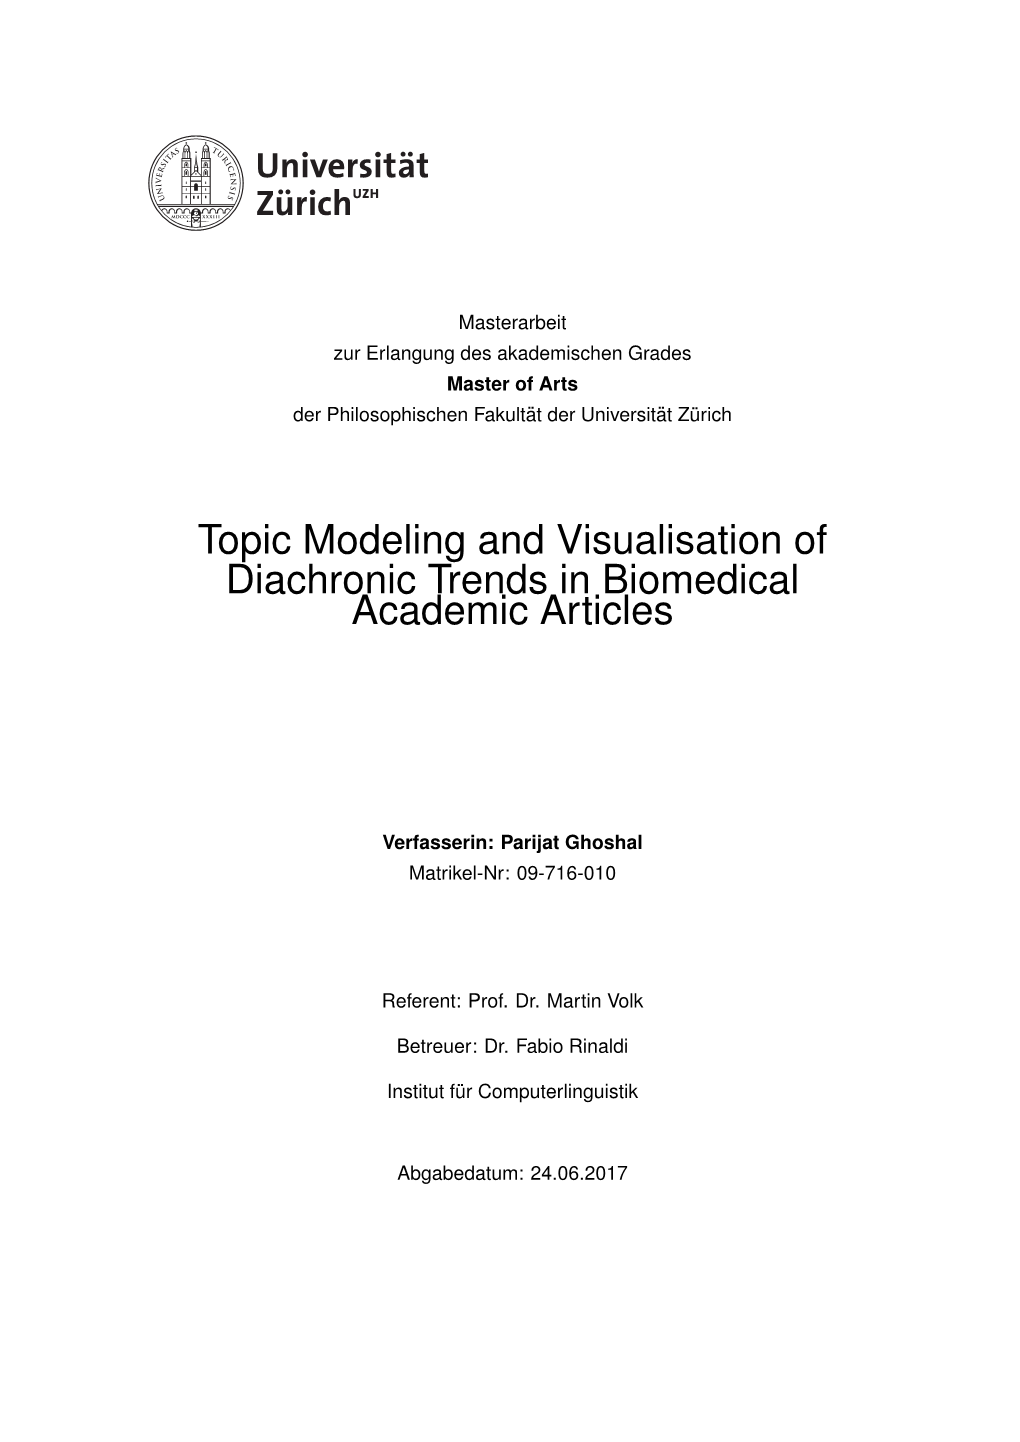 Topic Modeling and Visualisation of Diachronic Trends in Biomedical Academic Articles